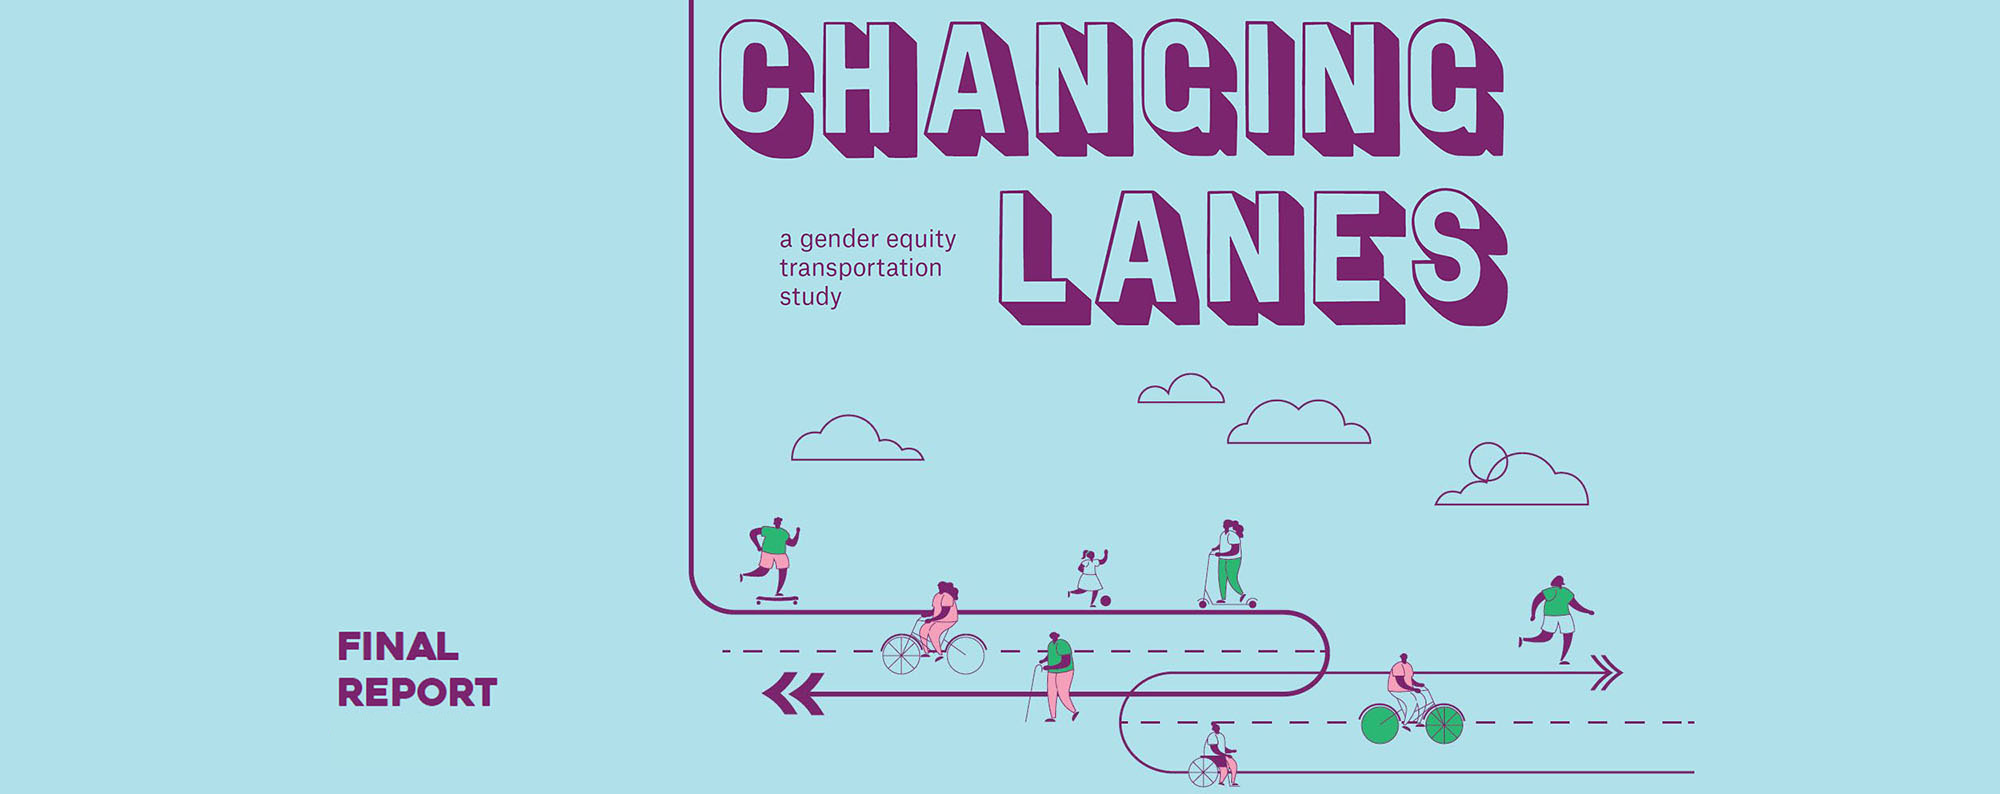 https://ladot.lacity.gov/sites/default/files/hero-images/changing-lanes-report-cover-030.jpg